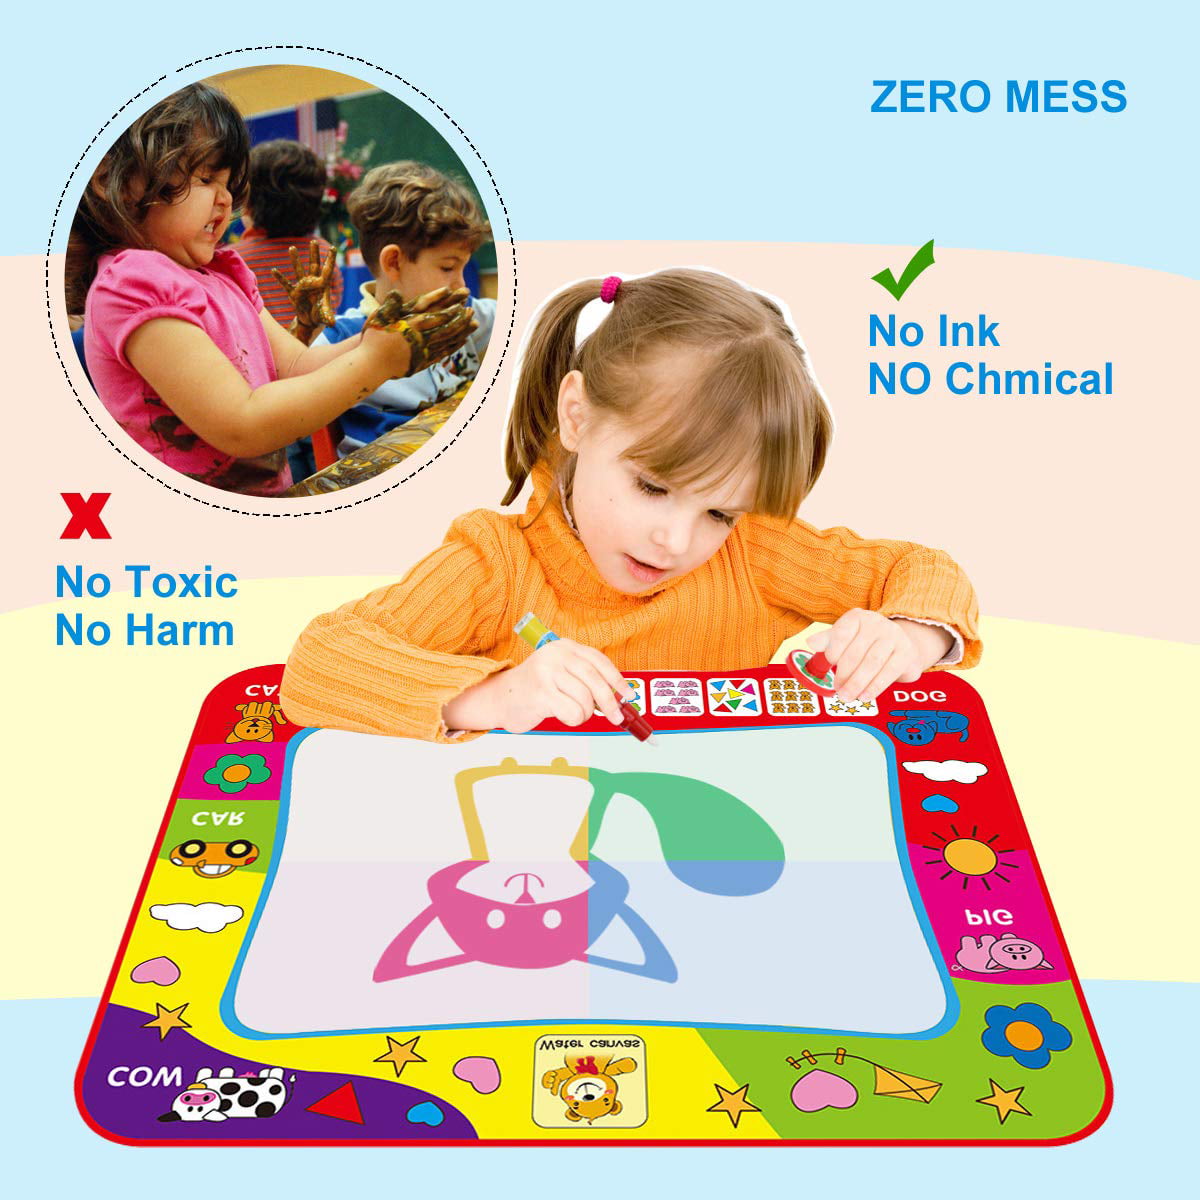 INFANTMOMENT Water Doodle Mat Water Magic Mat Kids Drawing Painting Mat Writing Doodle Board Toy Color Doodle Drawing Mat Educational Toys w/ Magic Pens for Age 3